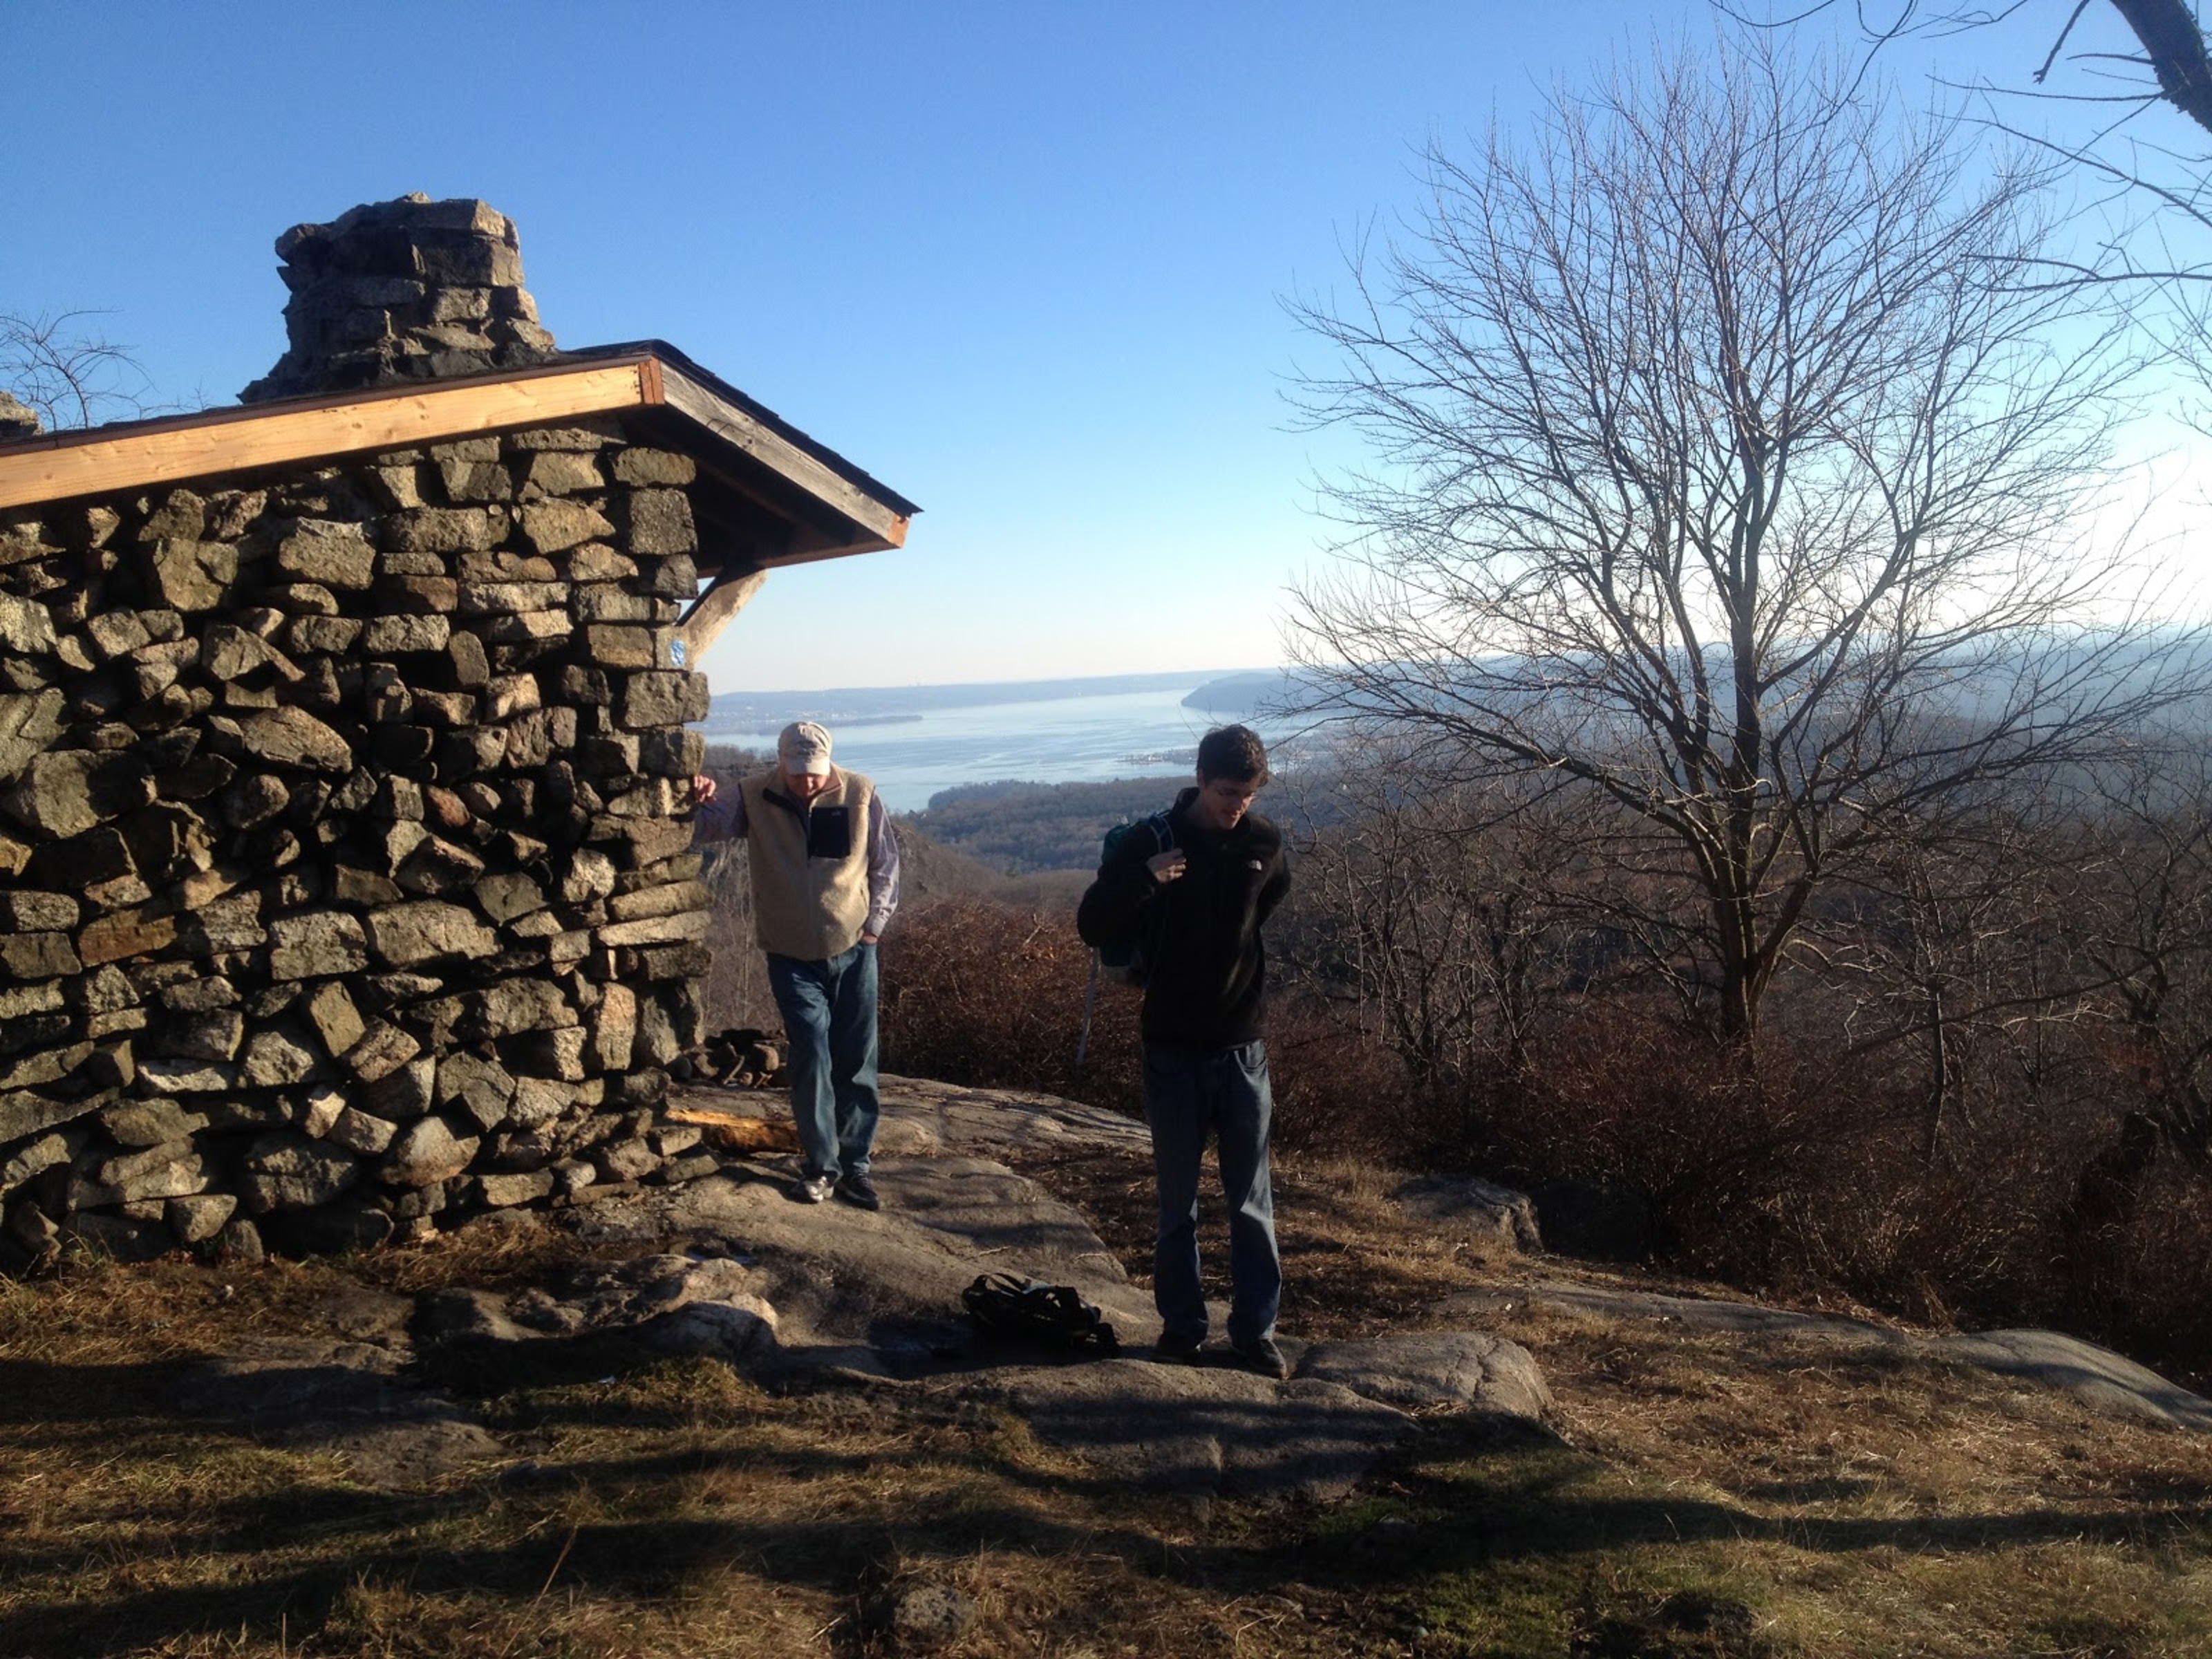 A New York Microadventure: West Mountain Shelter in Harriman State Park